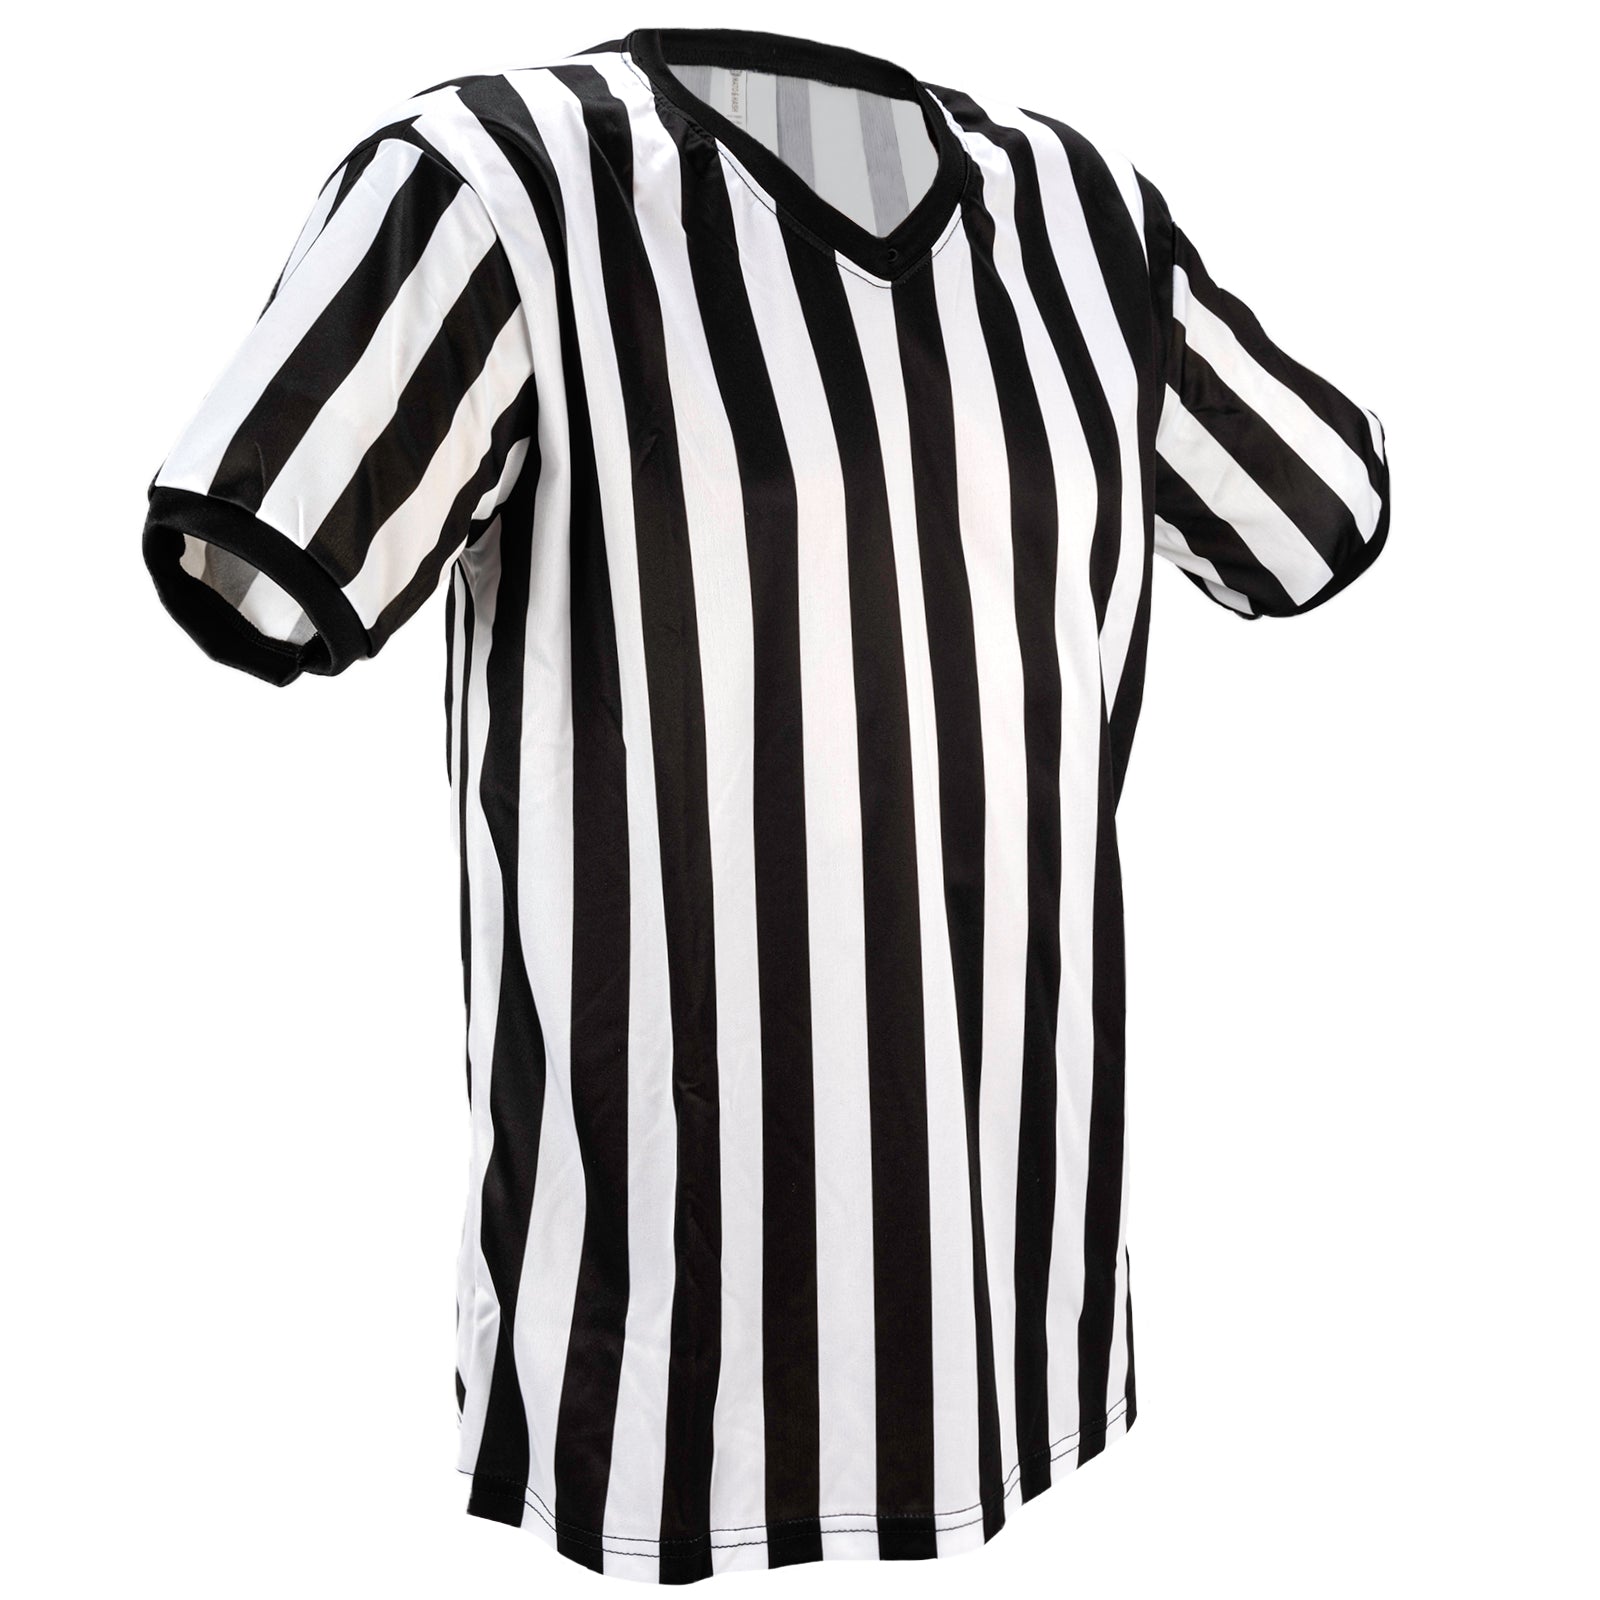 Men's V-Neck Referee Shirts For Officials and Costumes - Mato & Hash